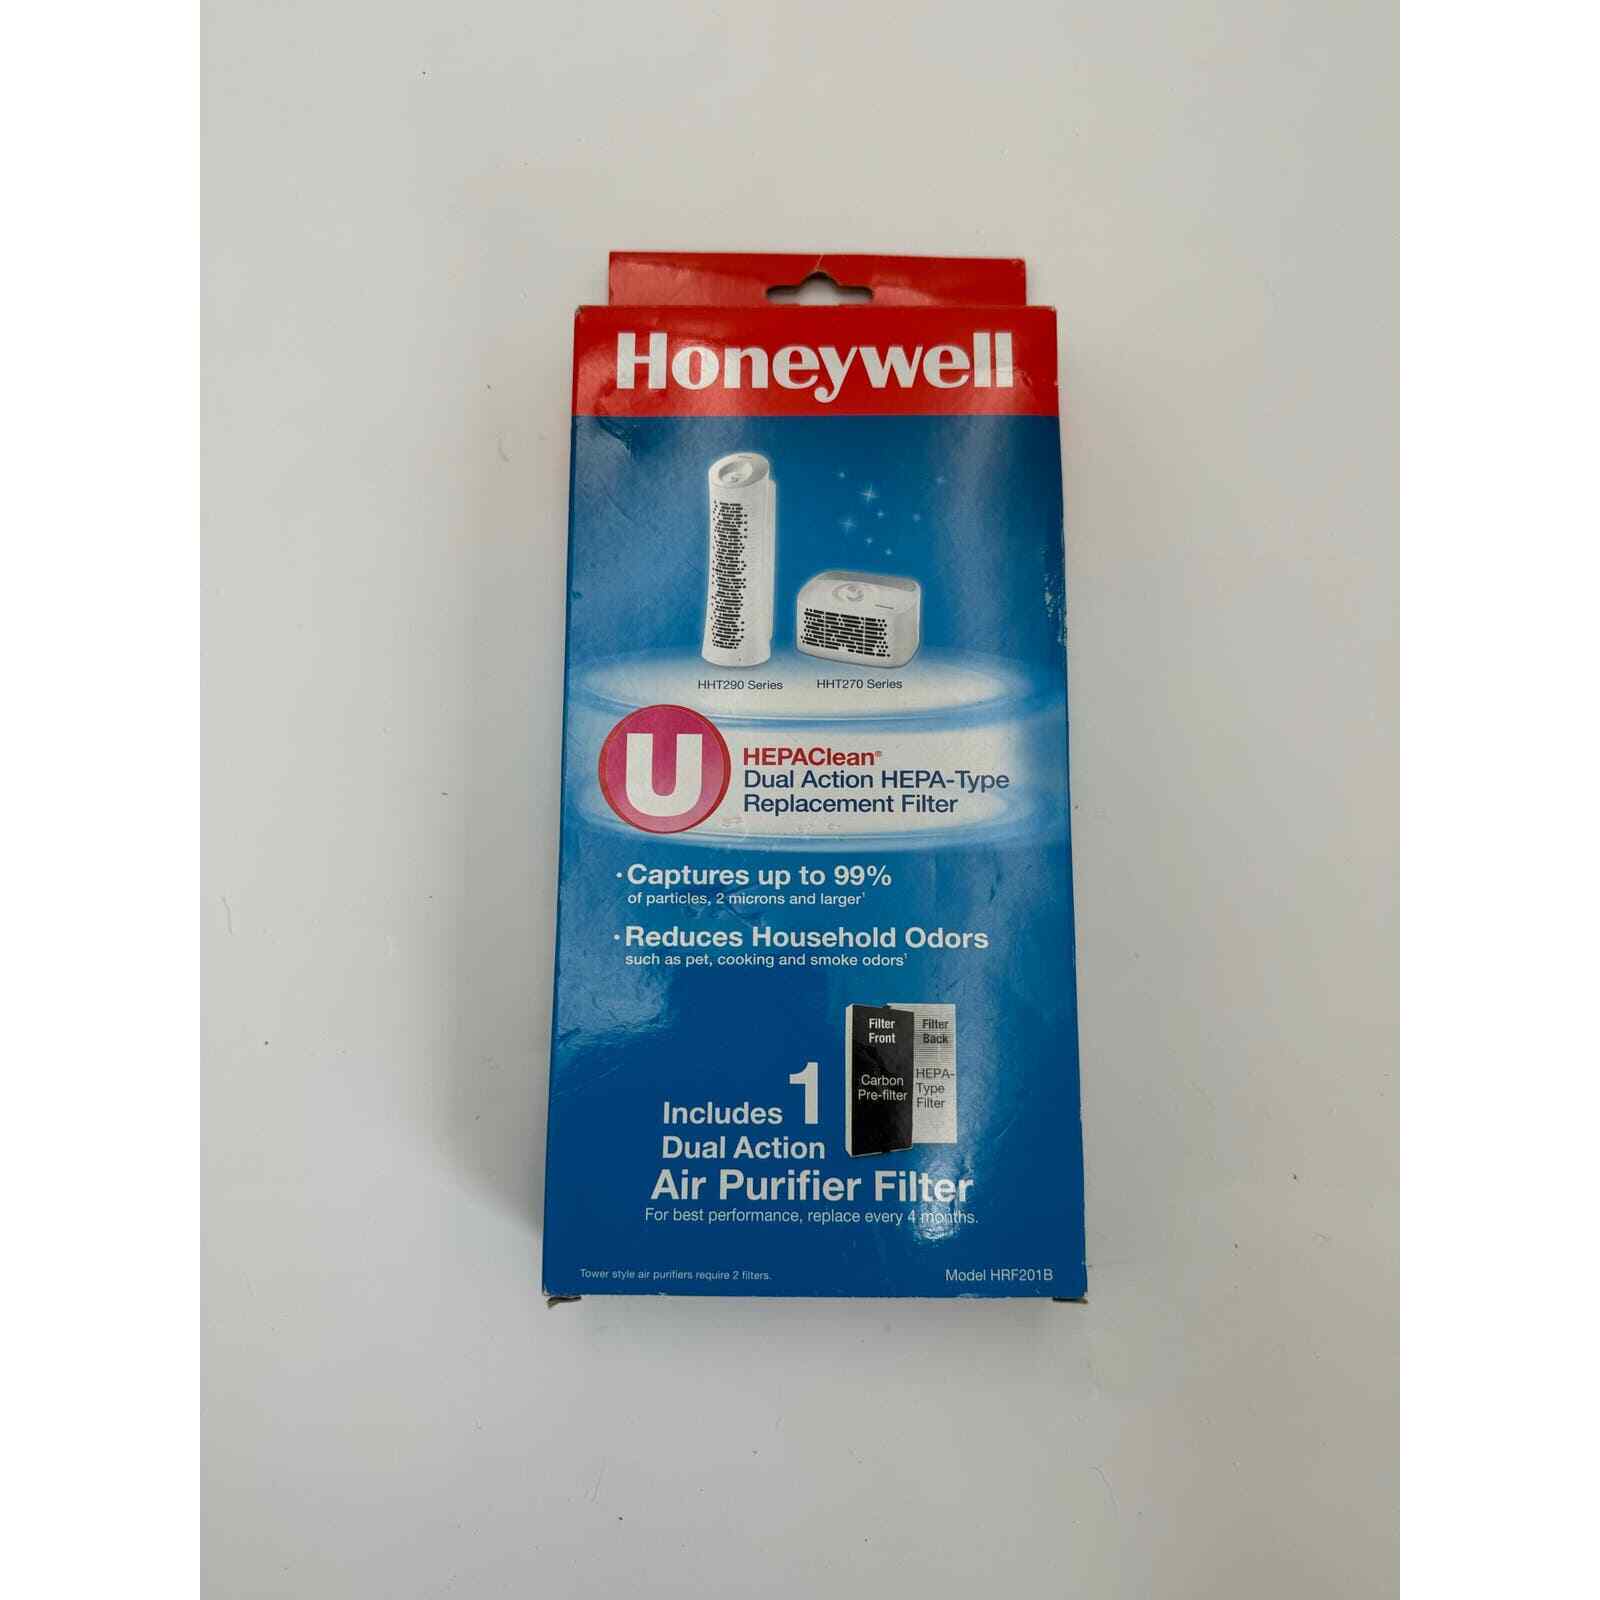 Honeywell HEPA-Type Air Purifier Filter, U – for HHT270 and HHT290 Series